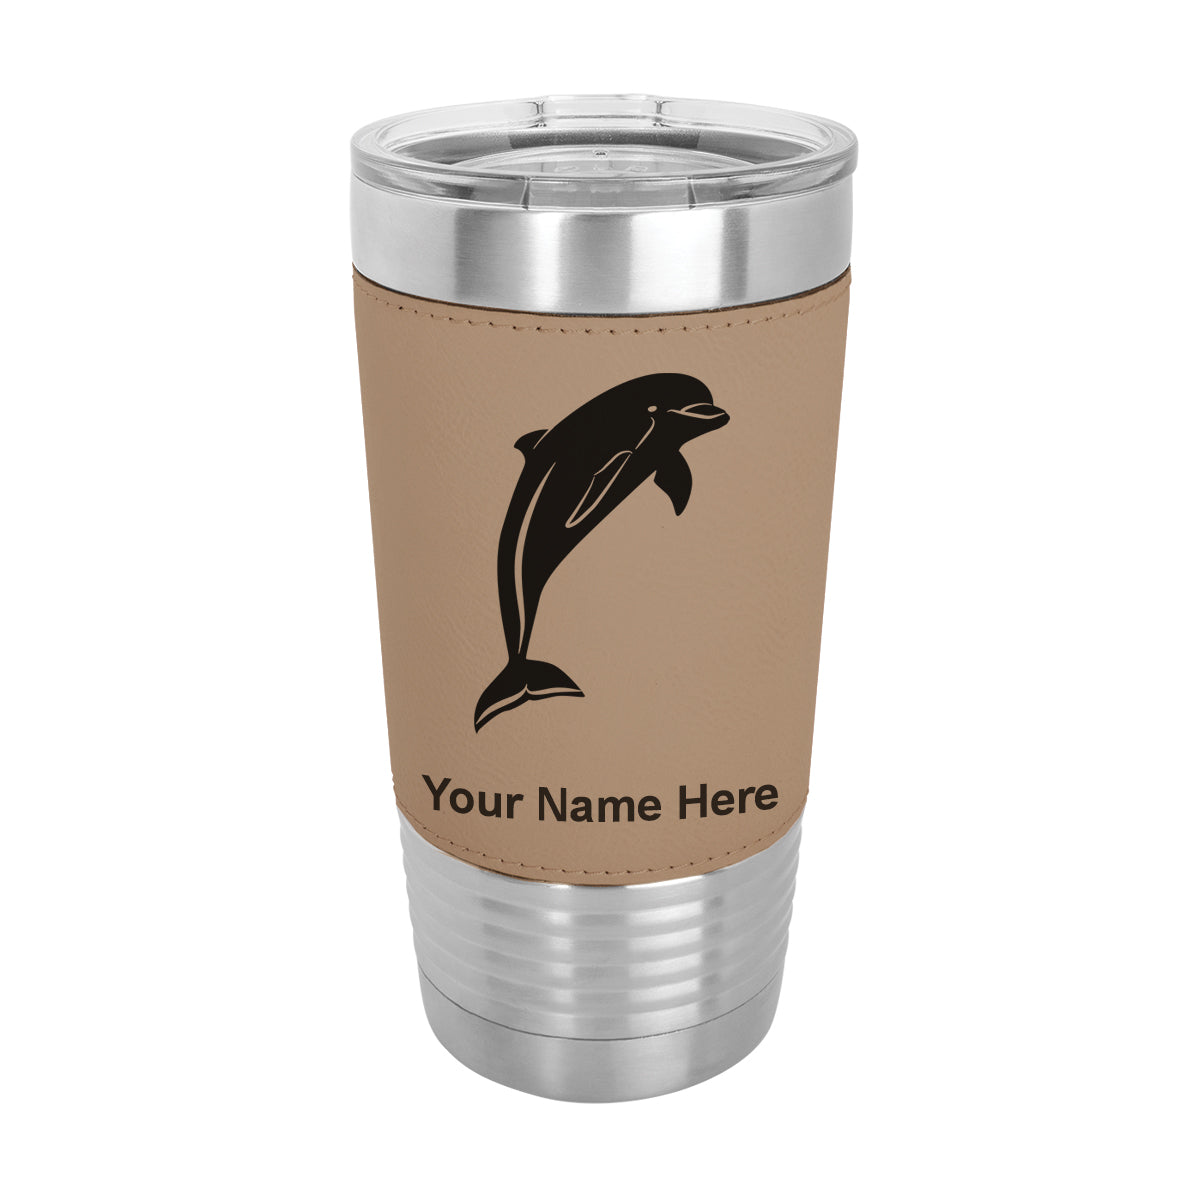 20oz Faux Leather Tumbler Mug, Dolphin, Personalized Engraving Included - LaserGram Custom Engraved Gifts